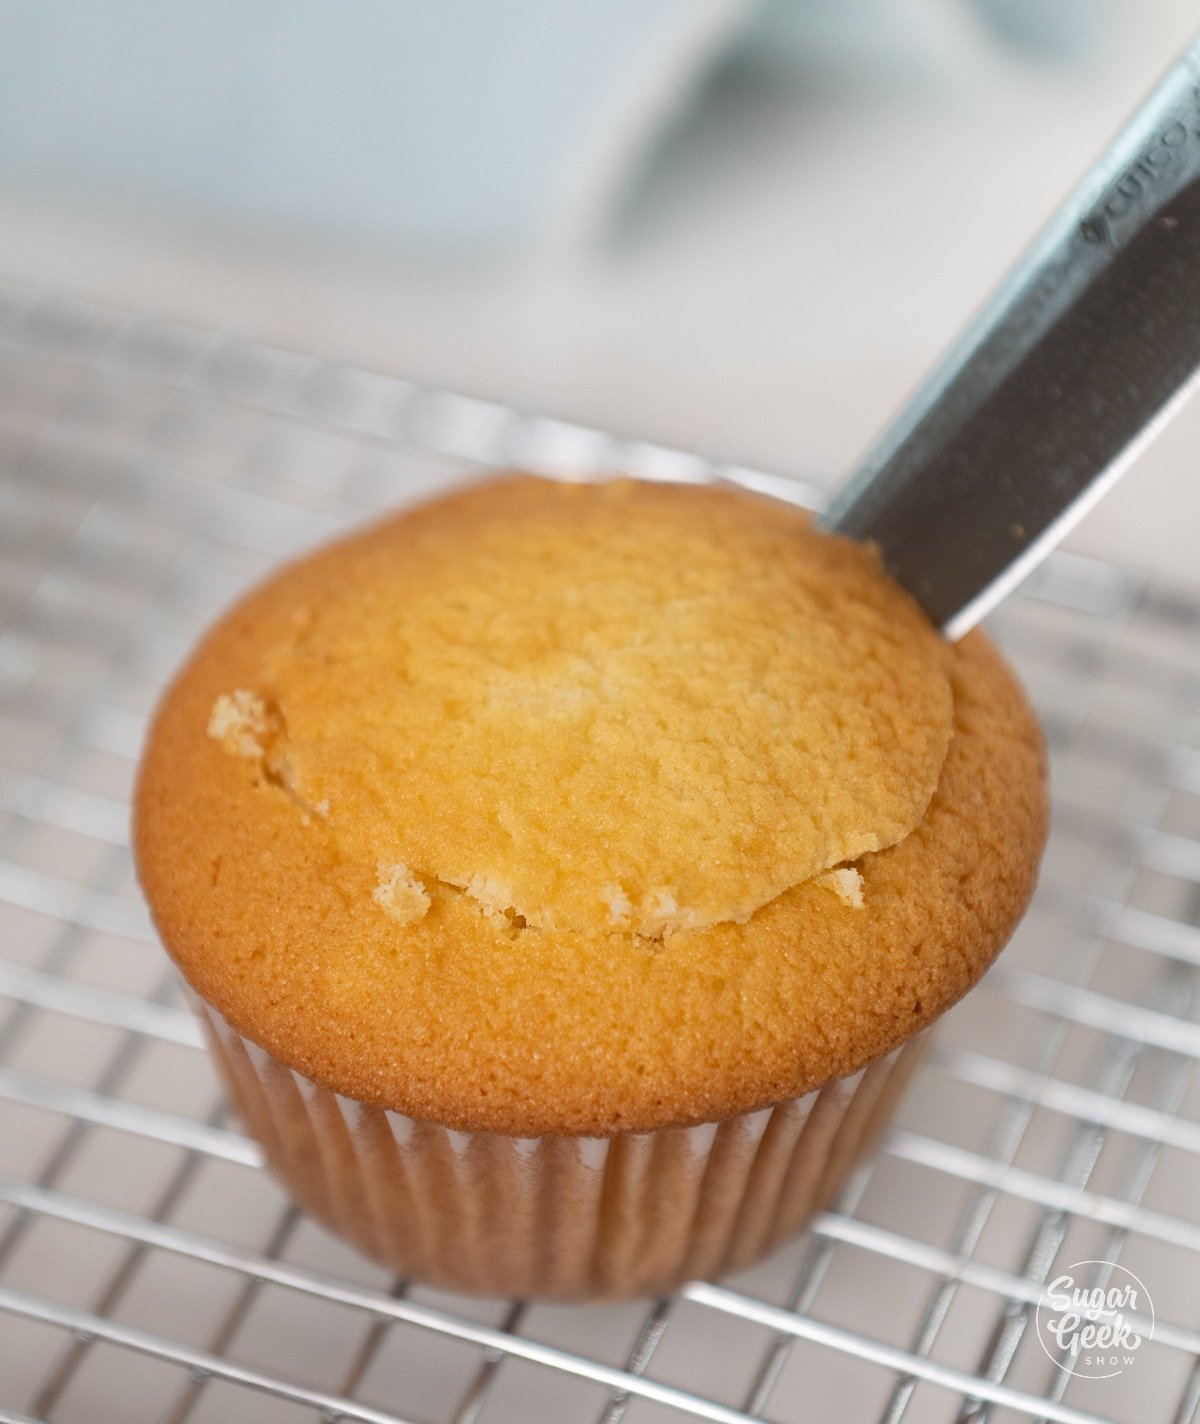 knife cutting center out of a yellow cupcake.